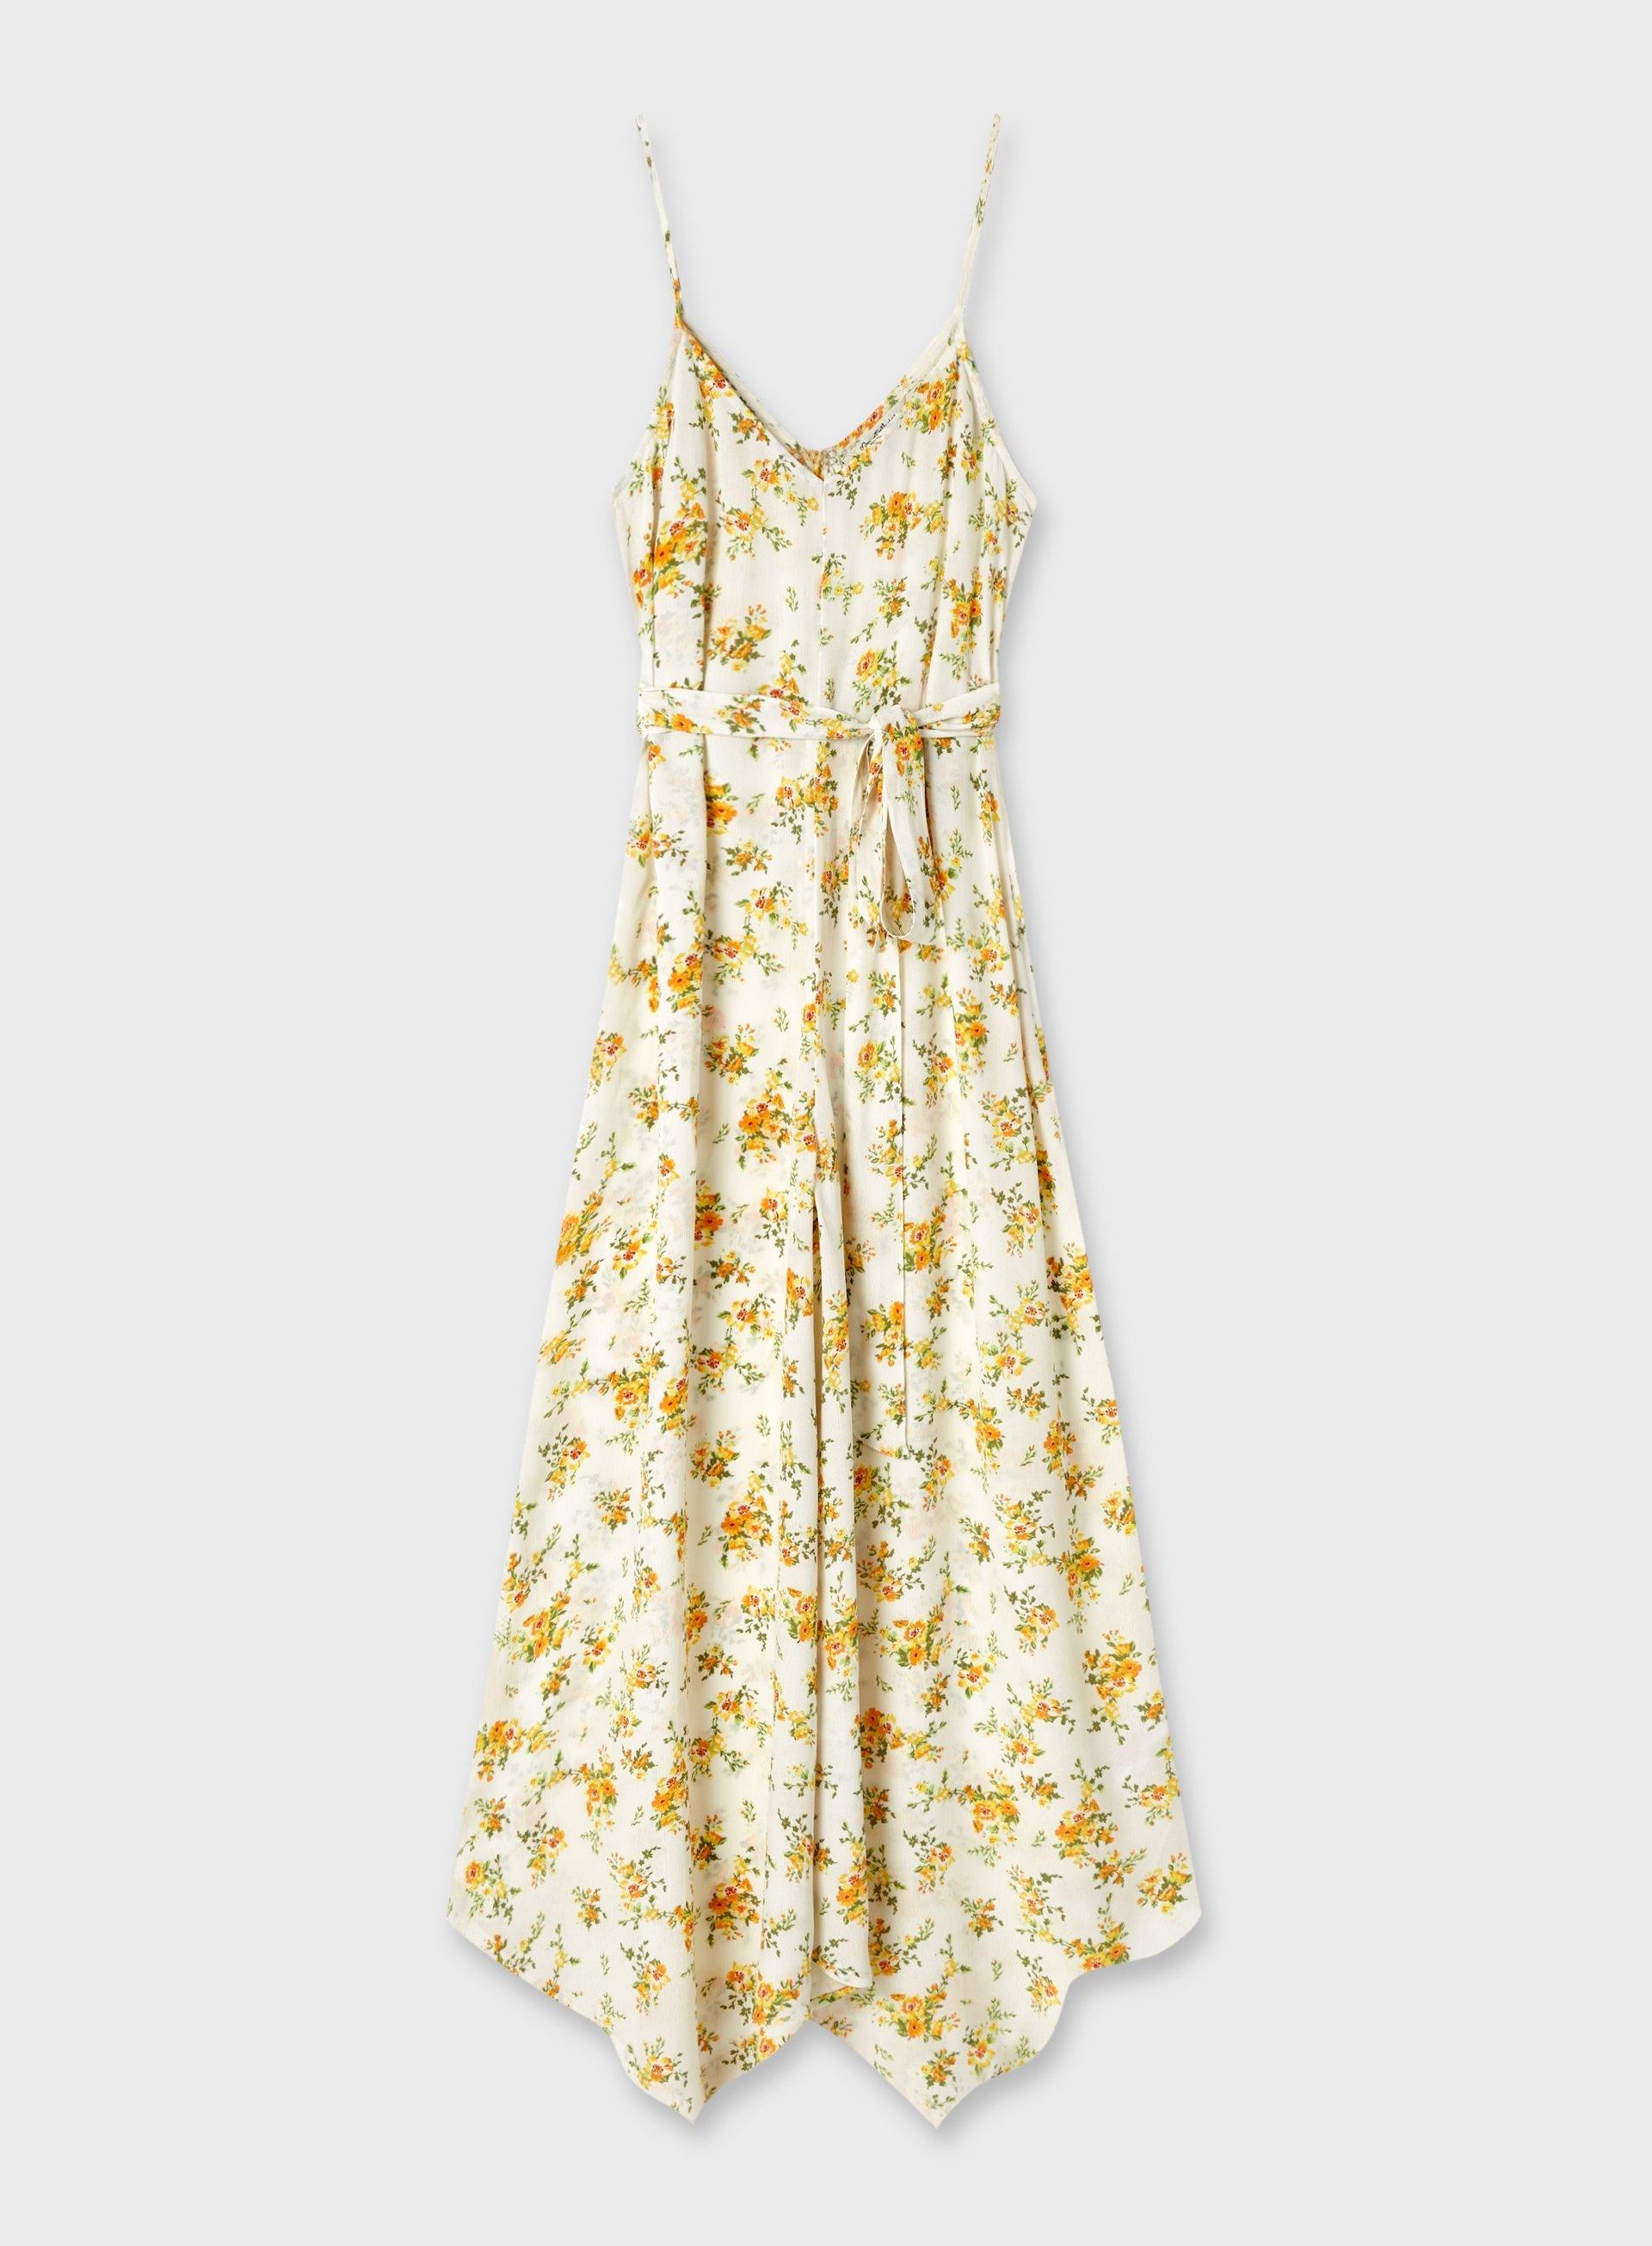 Miss Selfridge Synthetic Orange Blossom Print Camisole Jumpsuit in Ivory (White) - Lyst